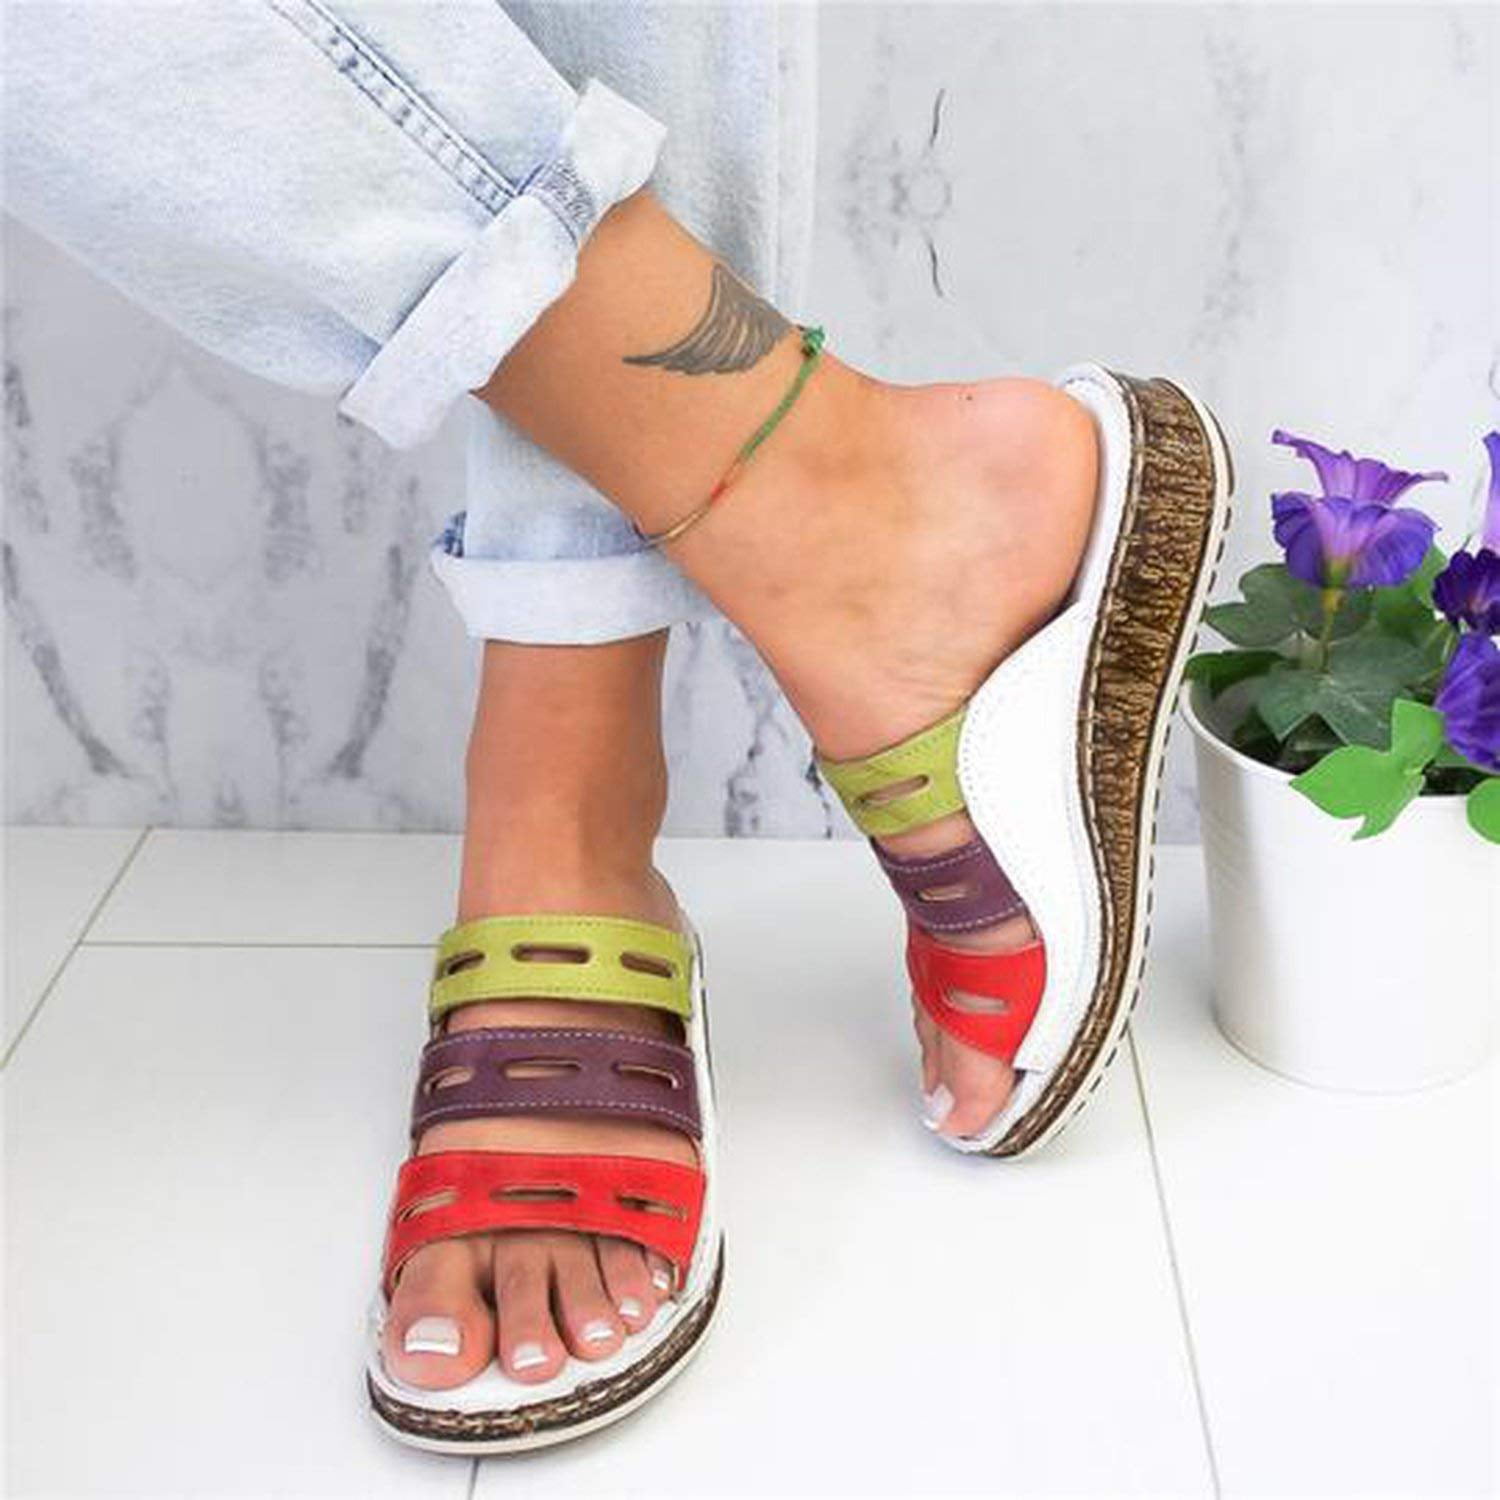 NEW Women Chic Three-color stitching Sandals-OPEN-TOE-WOMEN-SANDALS-SUMMER 